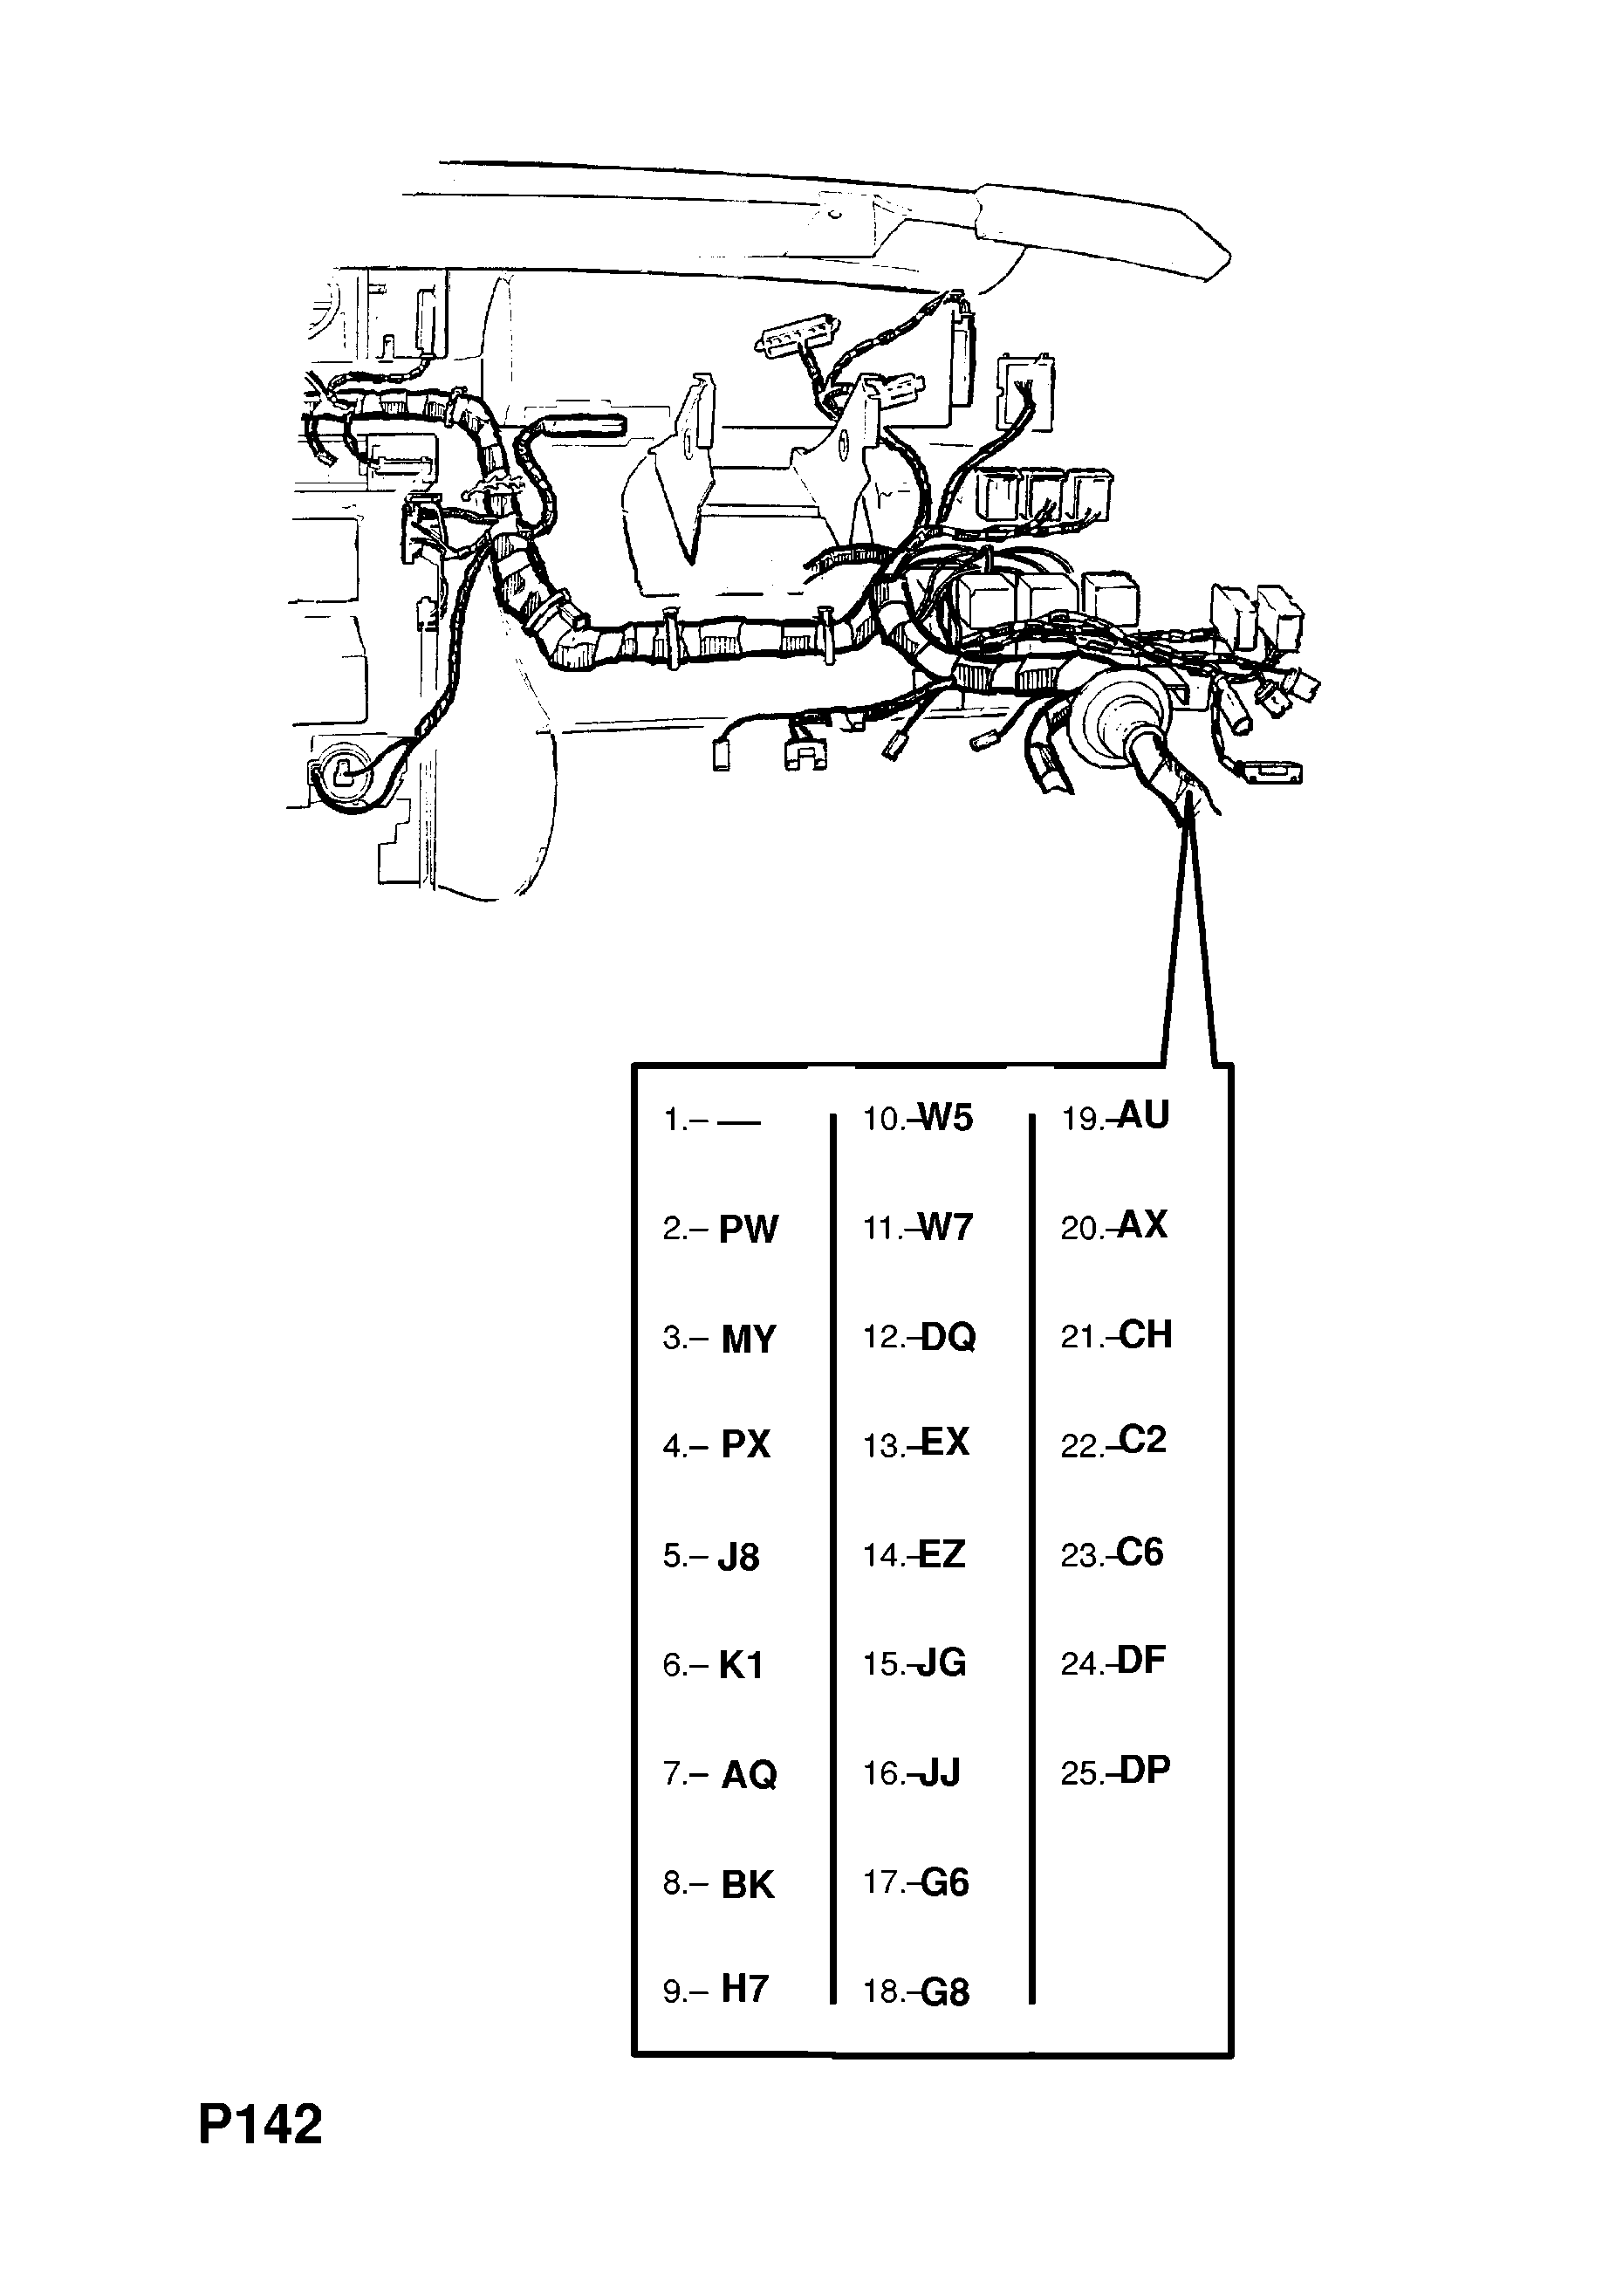 INSTRUMENT PANEL WIRING HARNESS (CONTD.) <small><i>[H1000001-L1999999 (CONTD.) FOR AIR CONDITIONING AND AUTOMATIC TRANSMISSION AND LCD INSTRUMENTS (CONTD.)]</i></small>